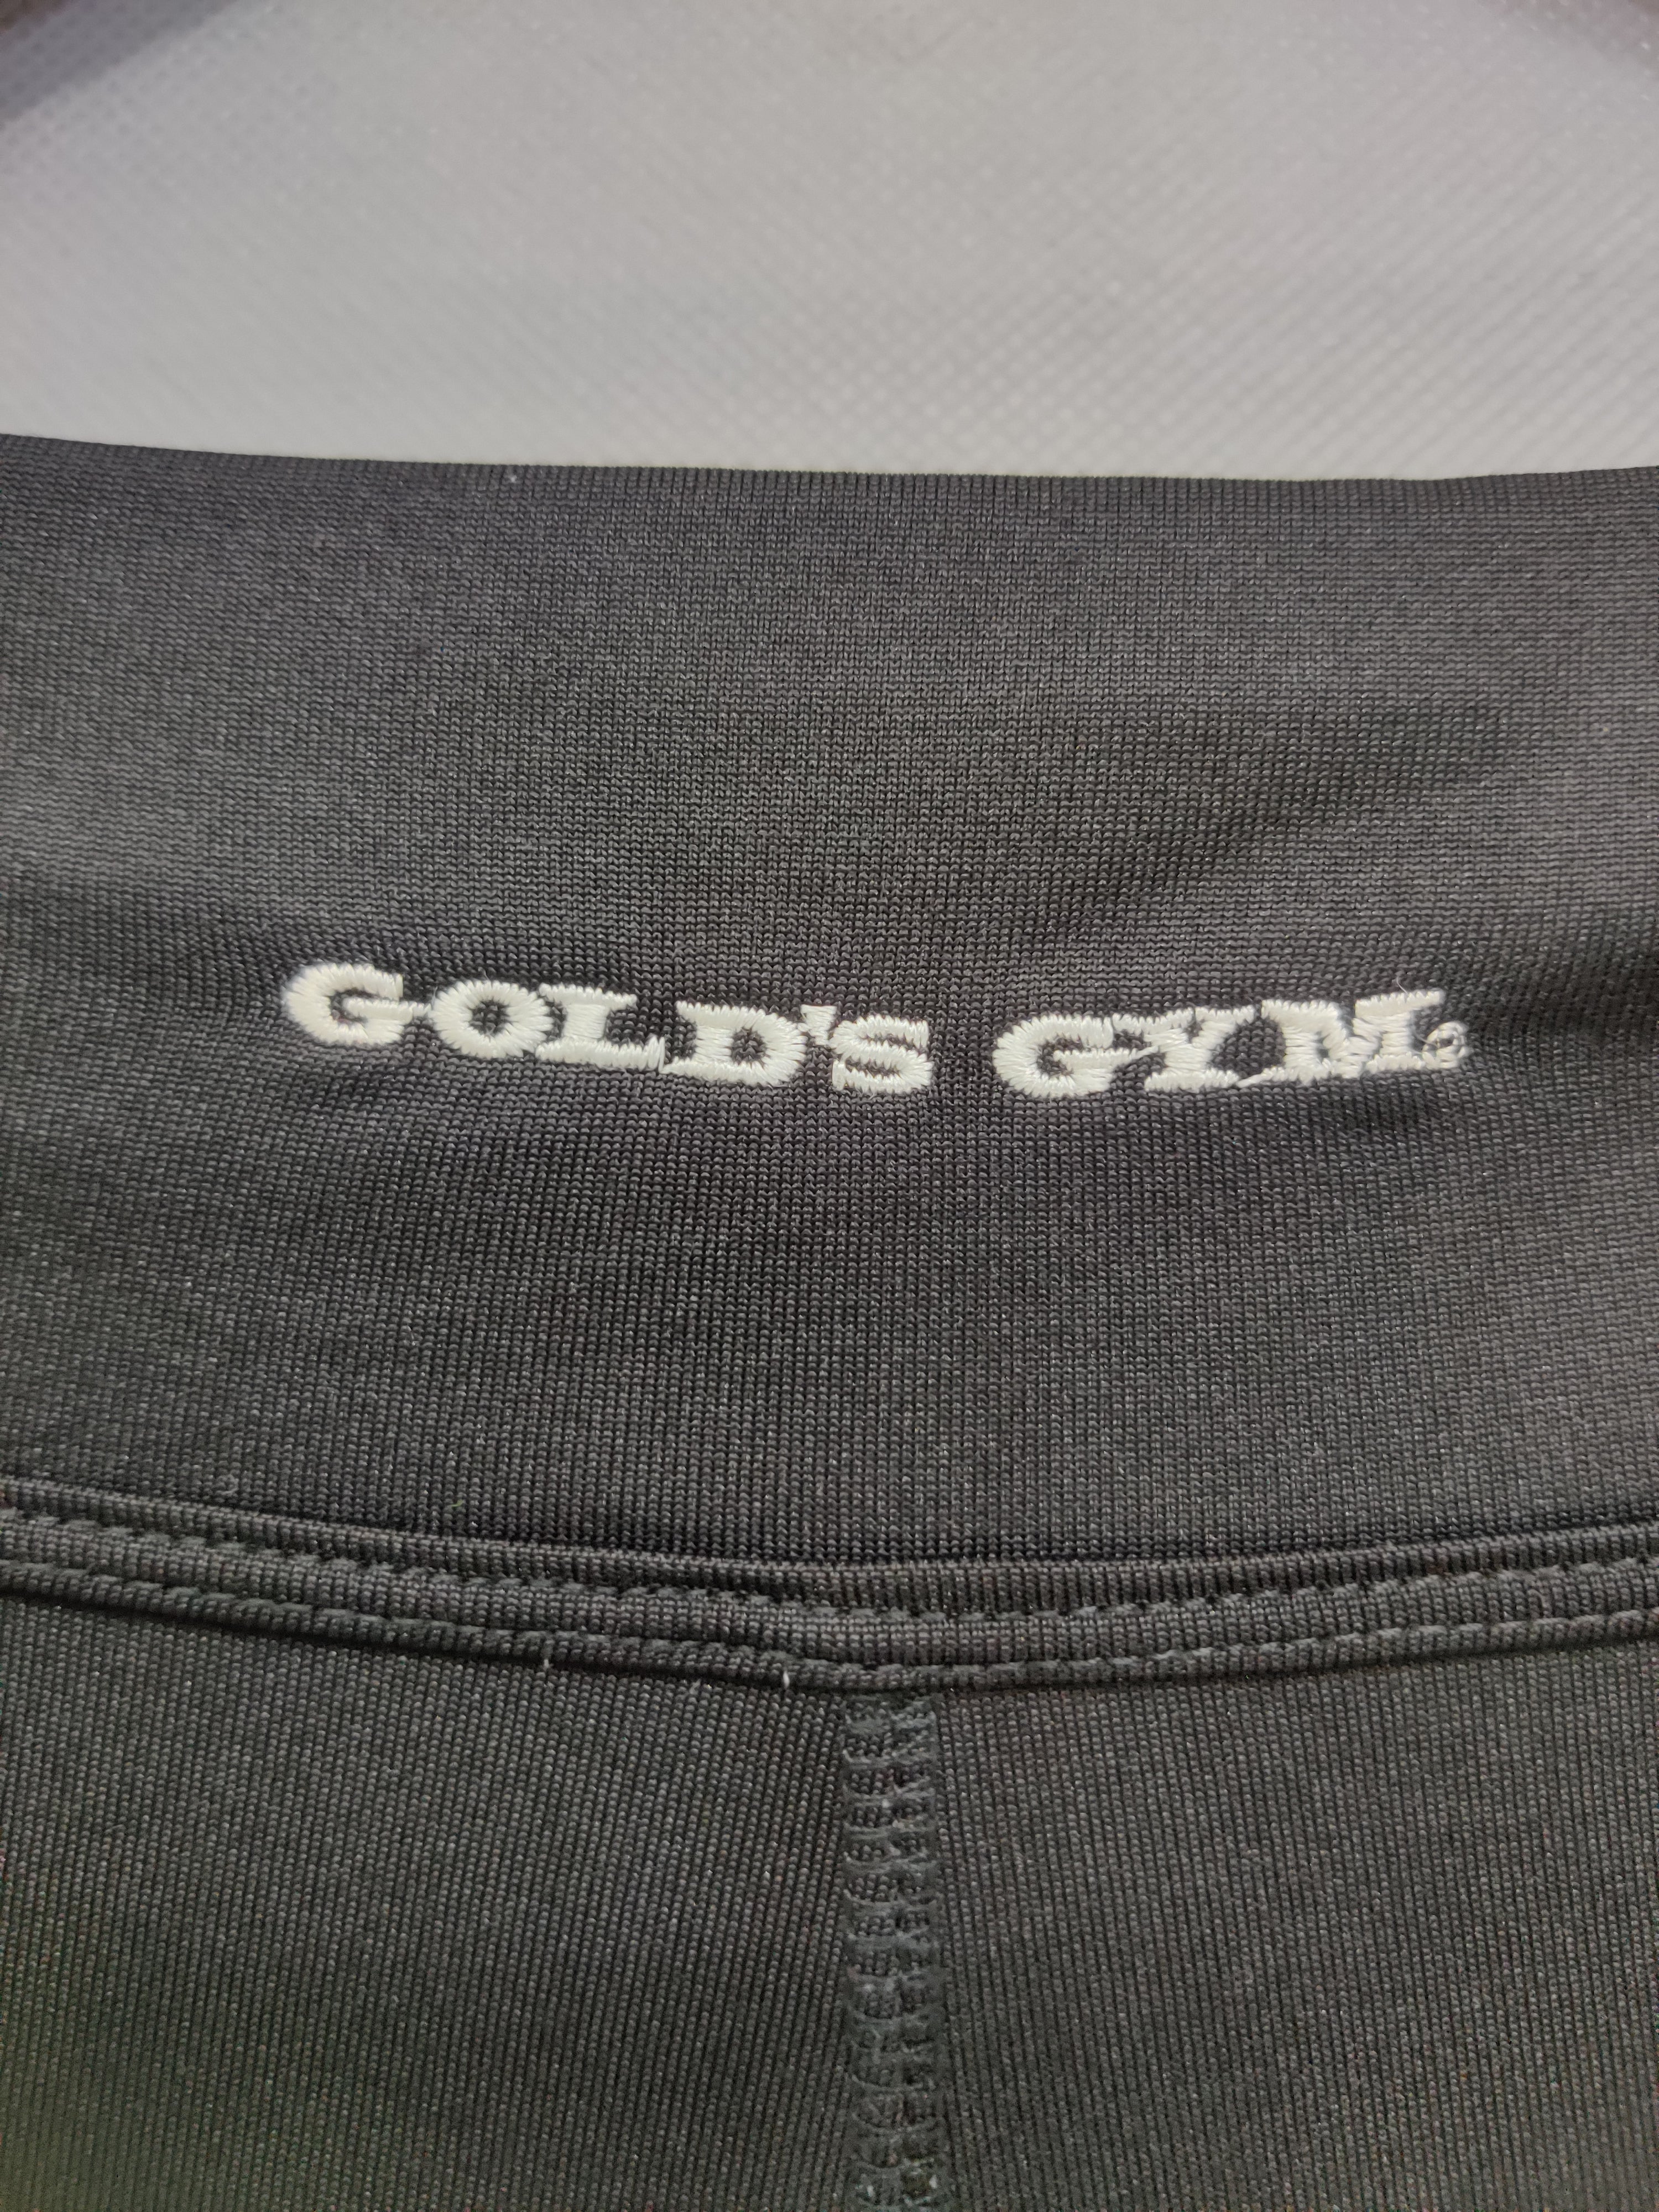 Gold"s Game Branded Original Sports Stretch Gym tights For Women